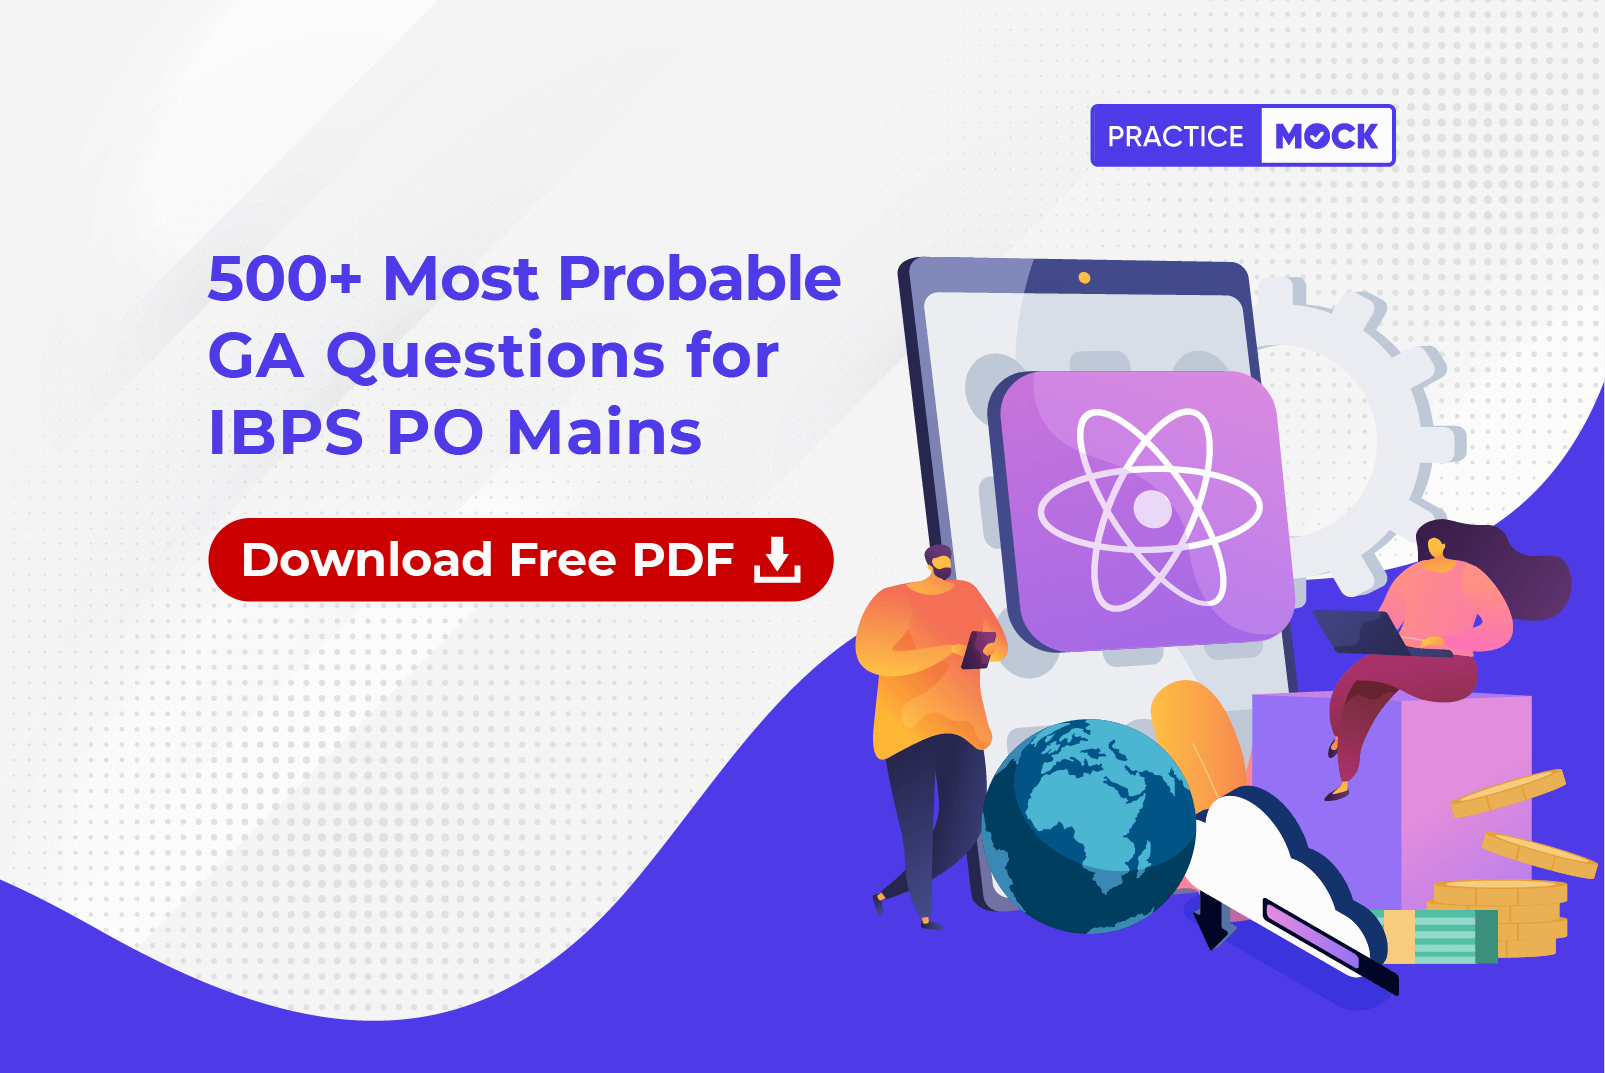 500+ Mpst Probable GA Questions IBPS PO Mains